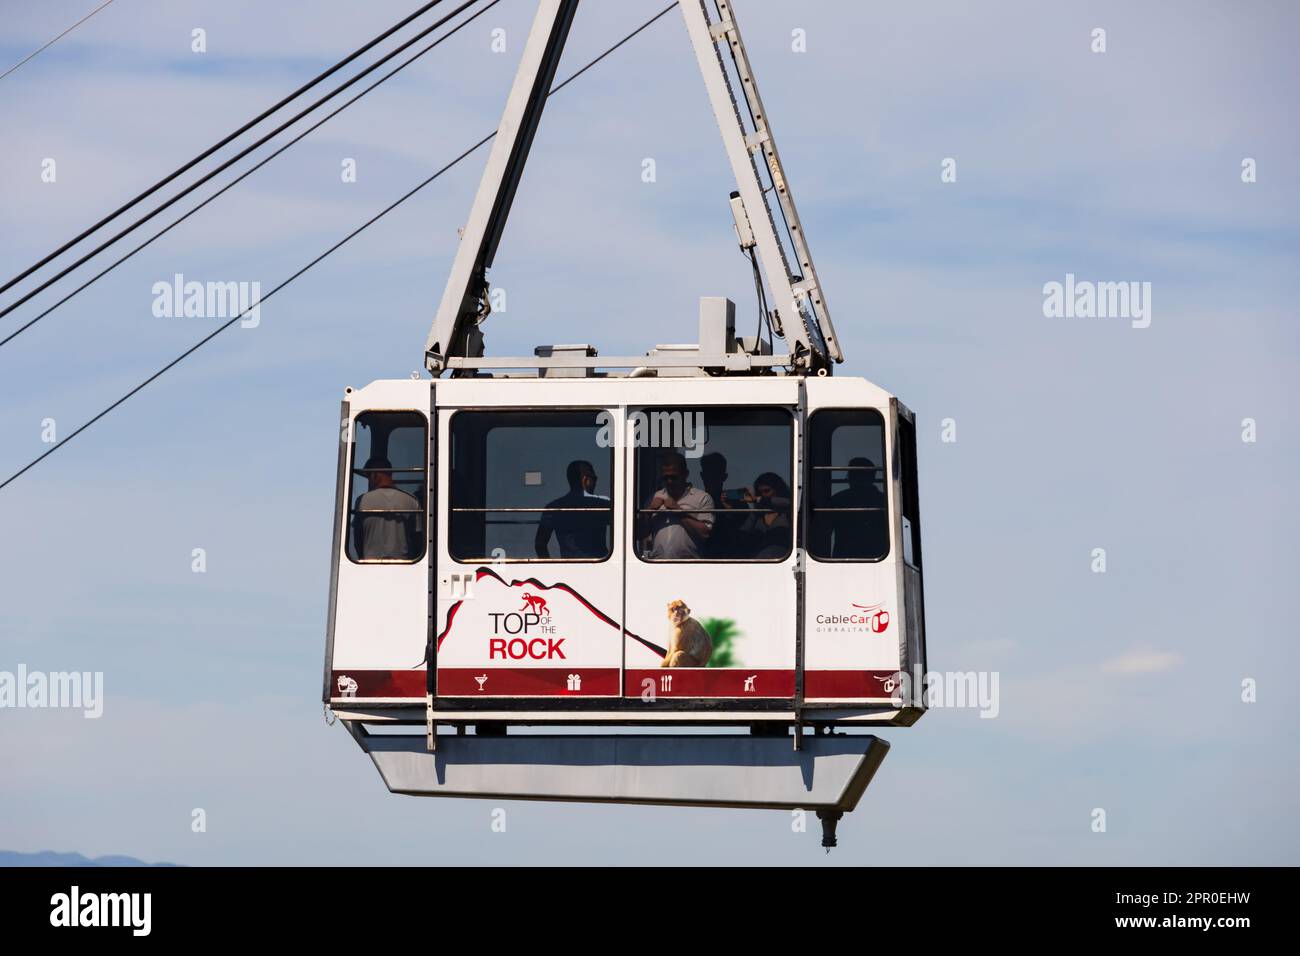 Full of tourists Cable car of the Top of the Rock Cablecar Gibraltar, Teleferico de Gibraltar. The British Overseas Territory of Gibraltar, the Rock o Stock Photo